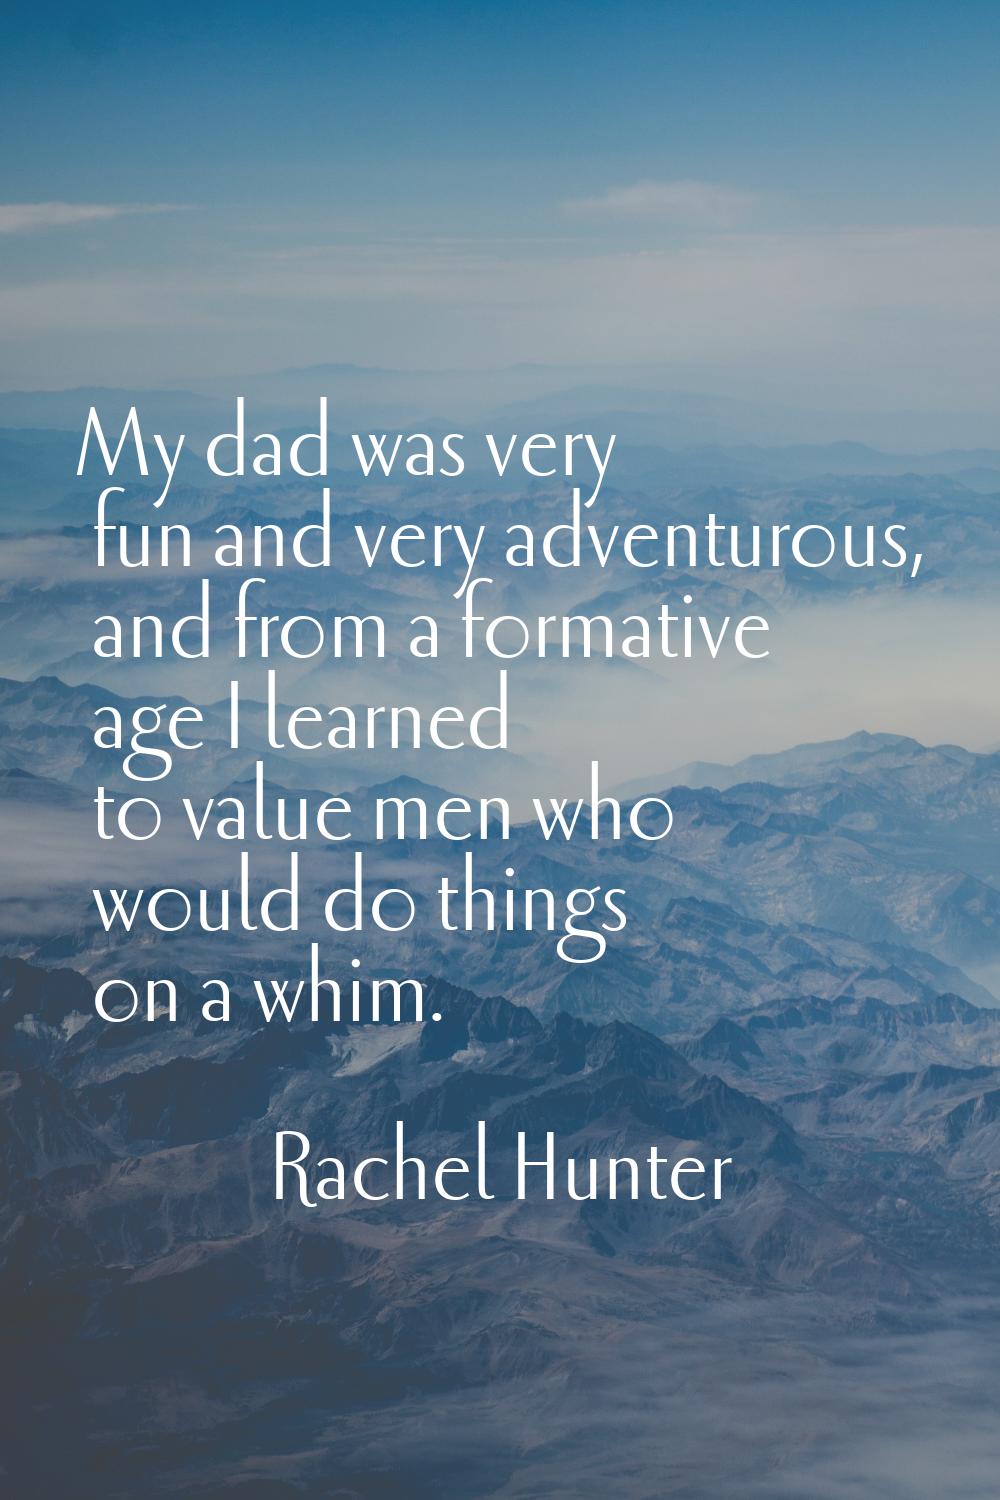 My dad was very fun and very adventurous, and from a formative age I learned to value men who would